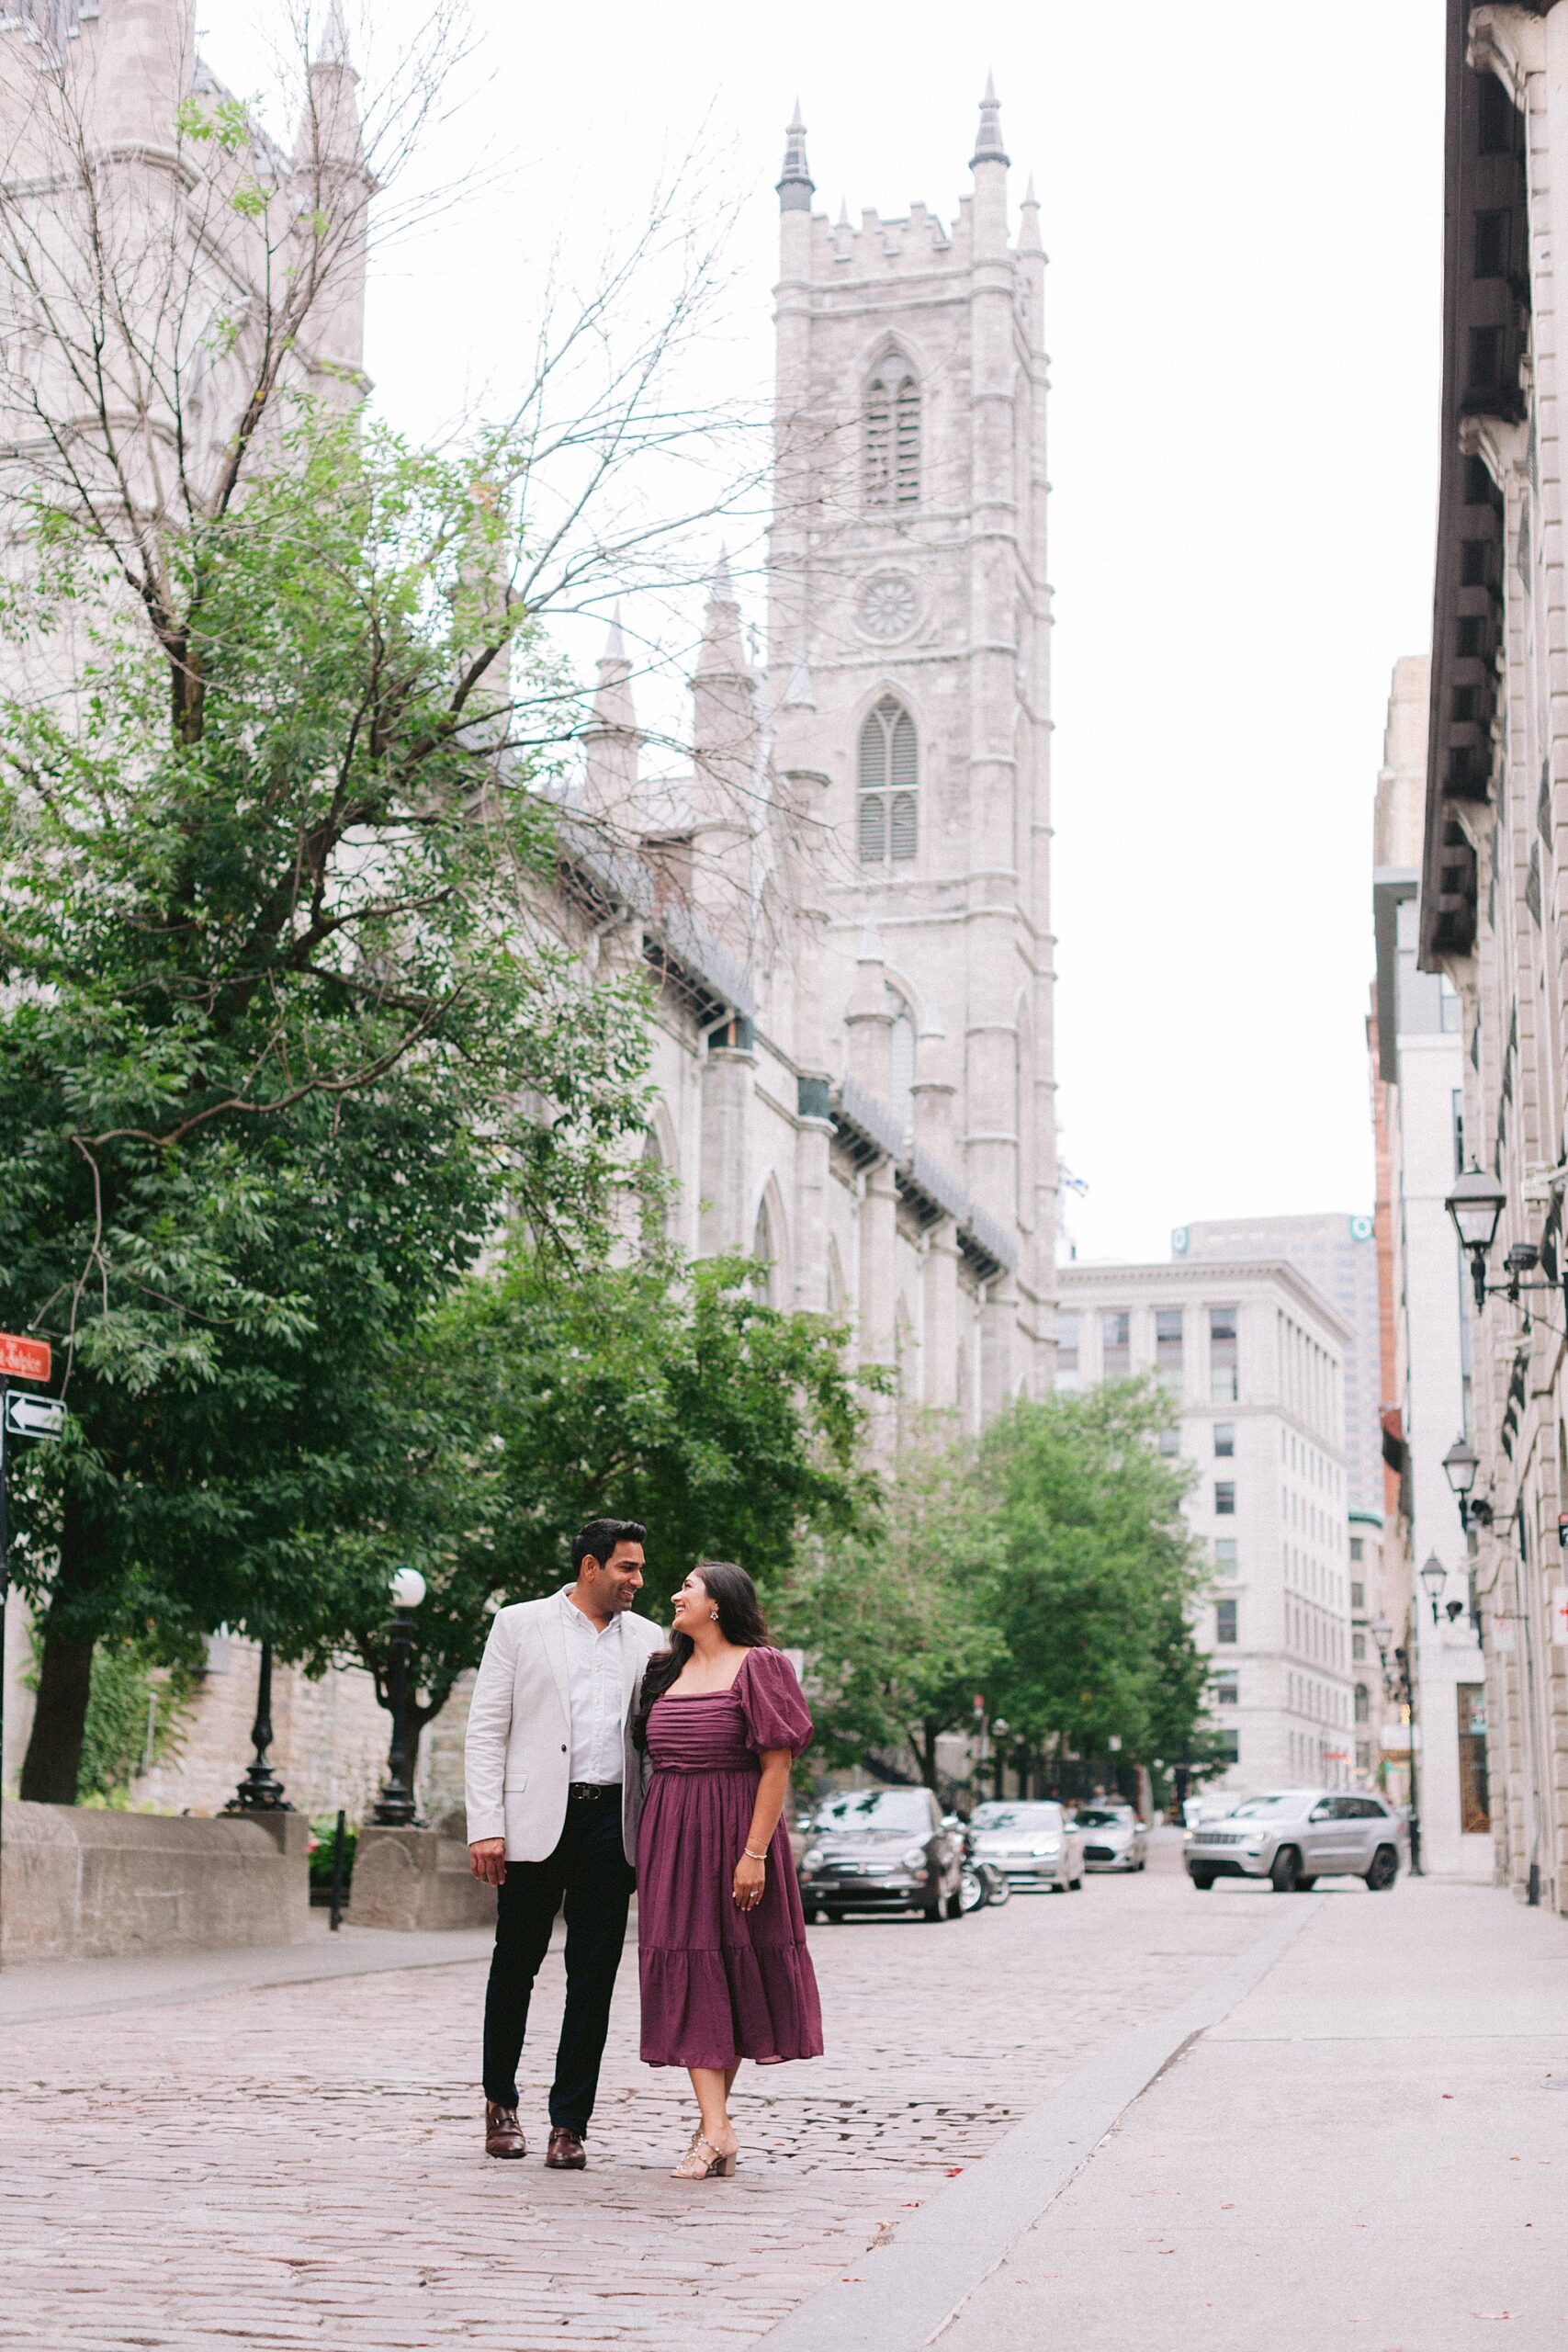 Montreal's love story comes to life through these engagement photos